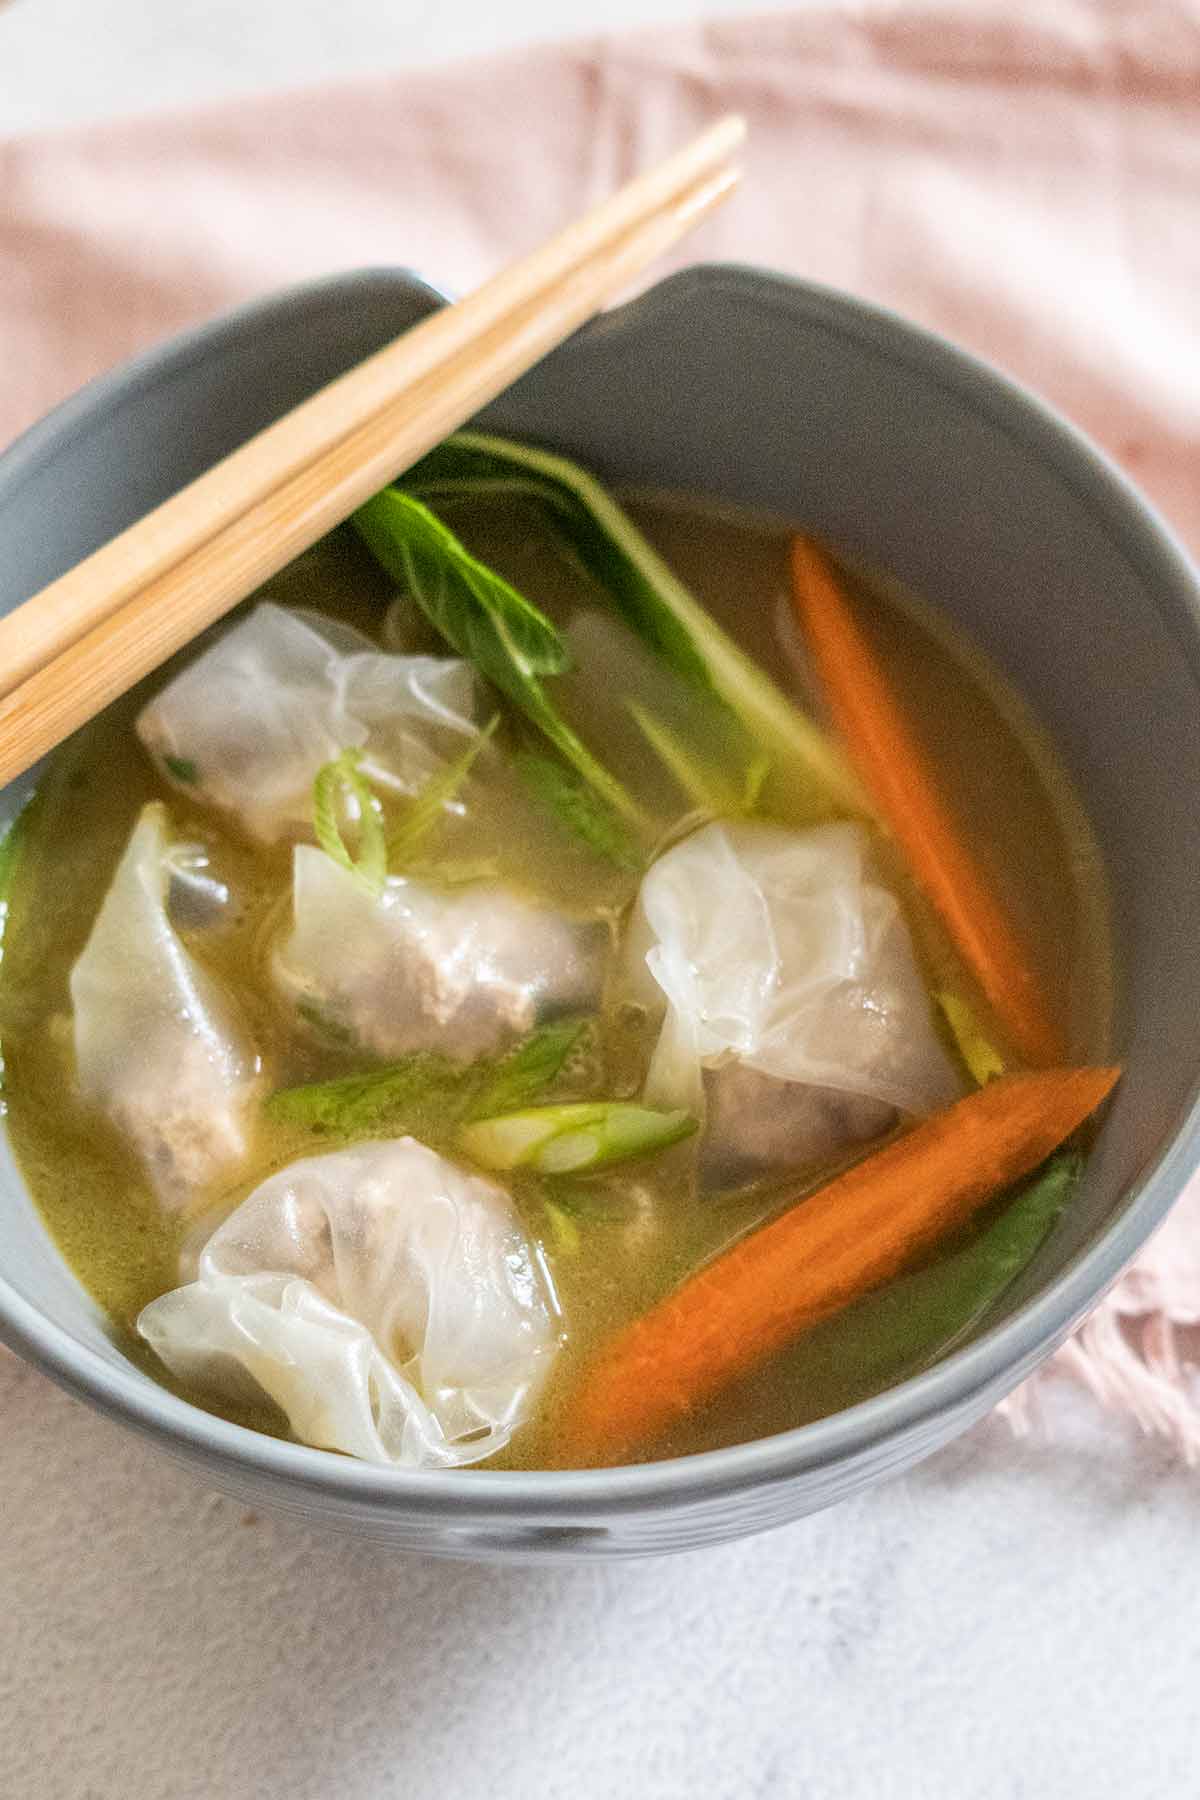 soup with dumplings and veggies in a bowl with chopsticks